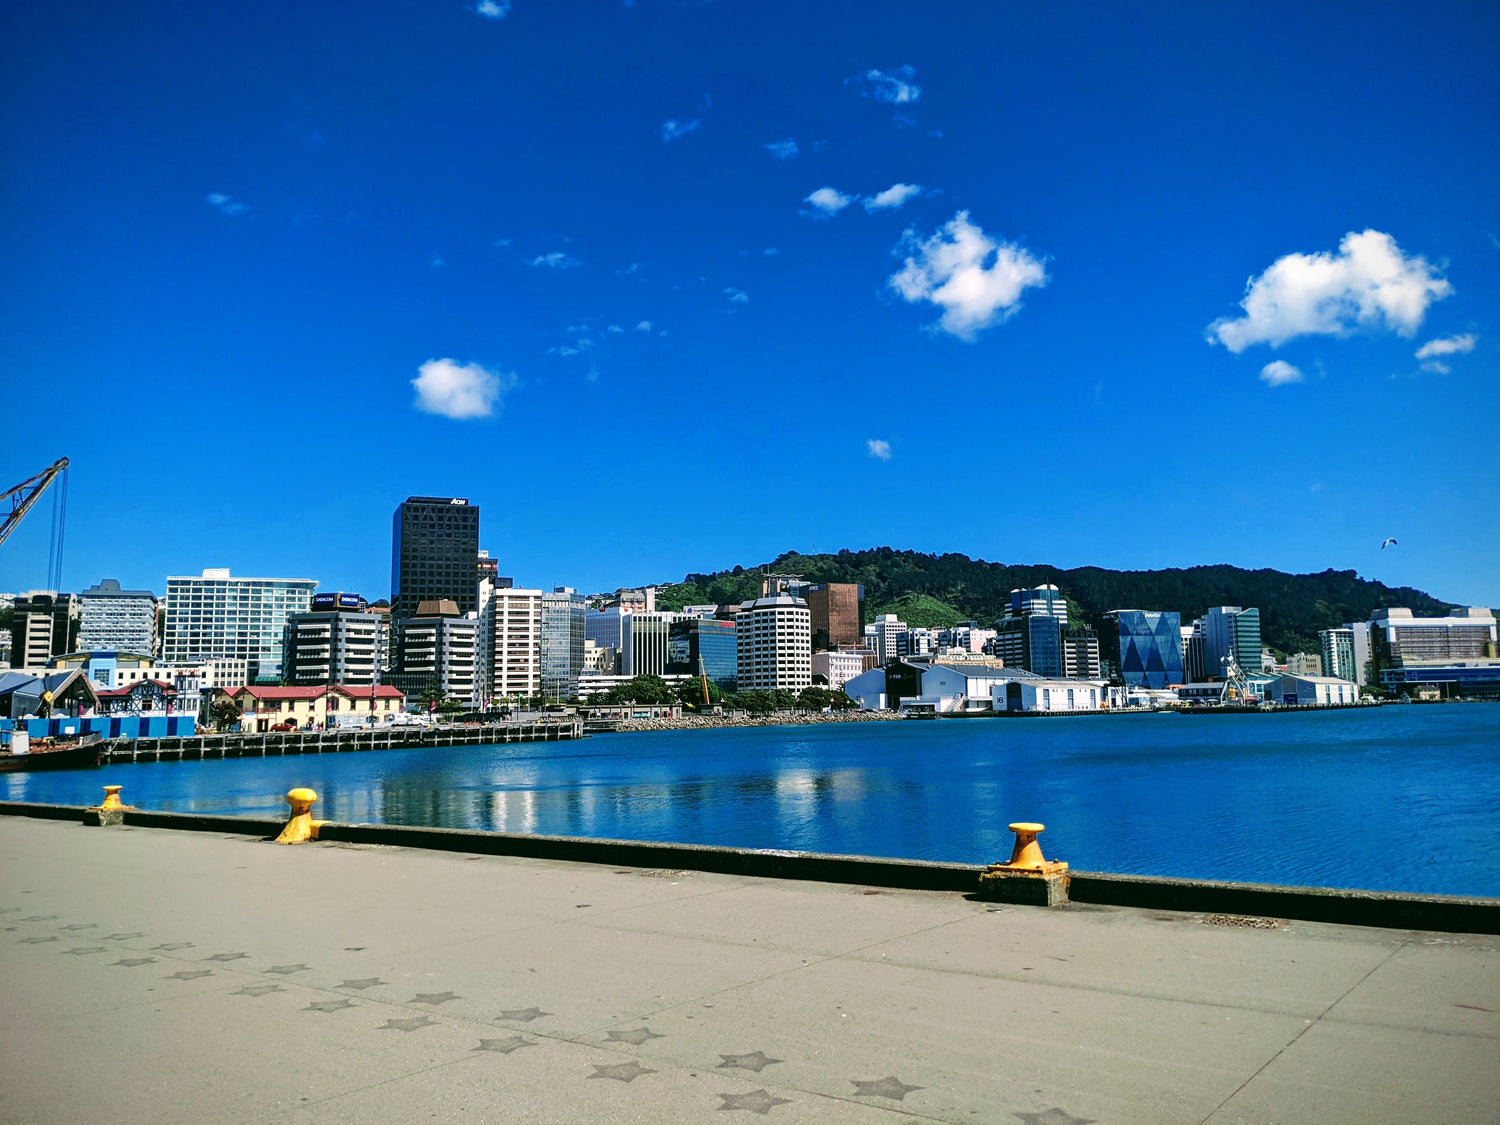 Wellington waterfront on a sunny day. Photo by Jannes Mingram